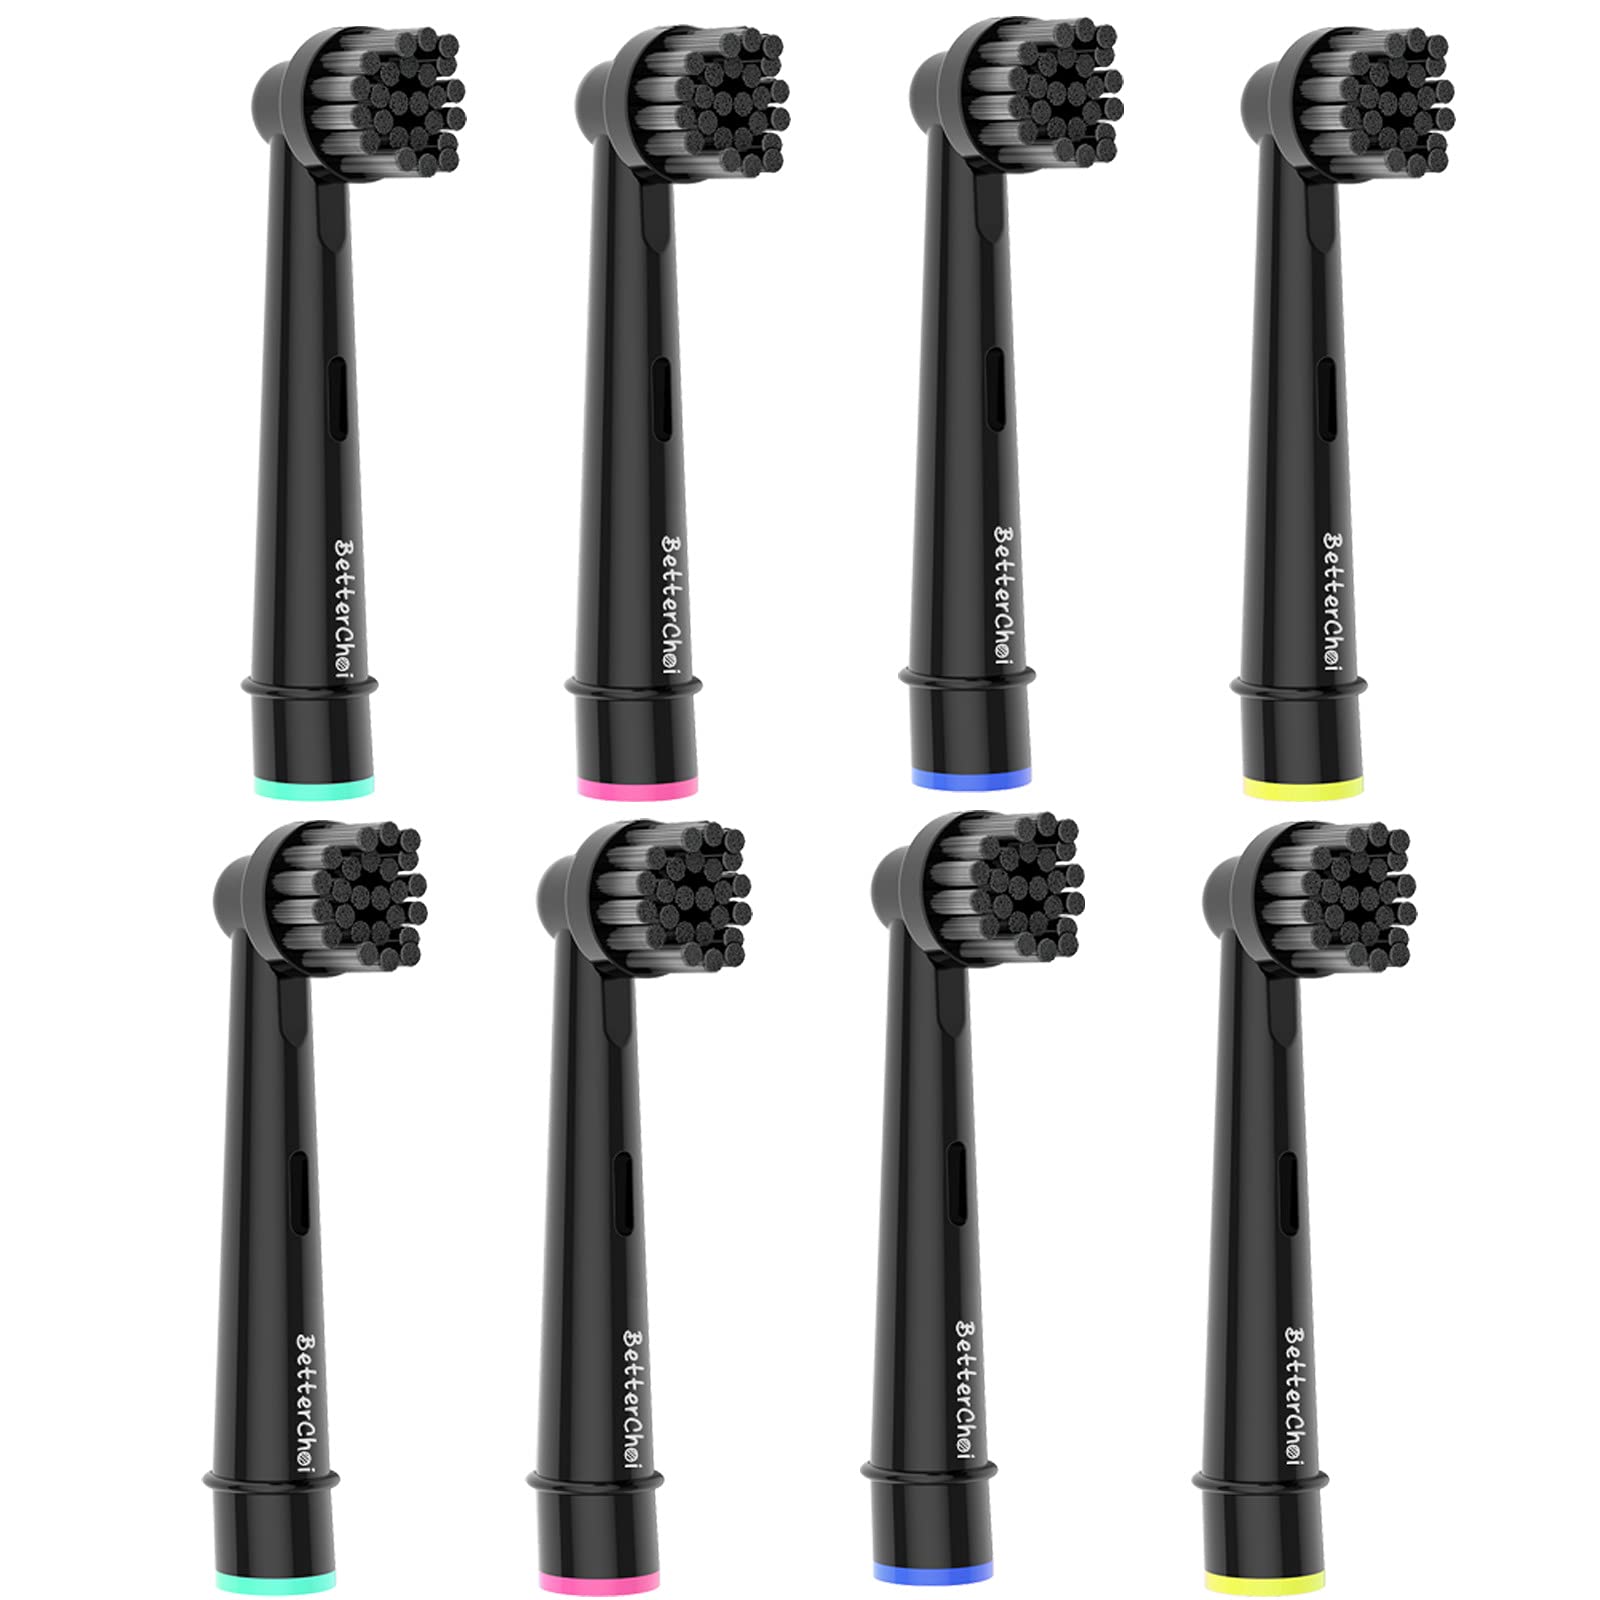 8pcs Charcoal Replacement Toothbrush Heads Compatible with Oral B Braun Electric Toothbrush, Active Charcoal Bristles, Keep The Mouth Fresh and Comfortable